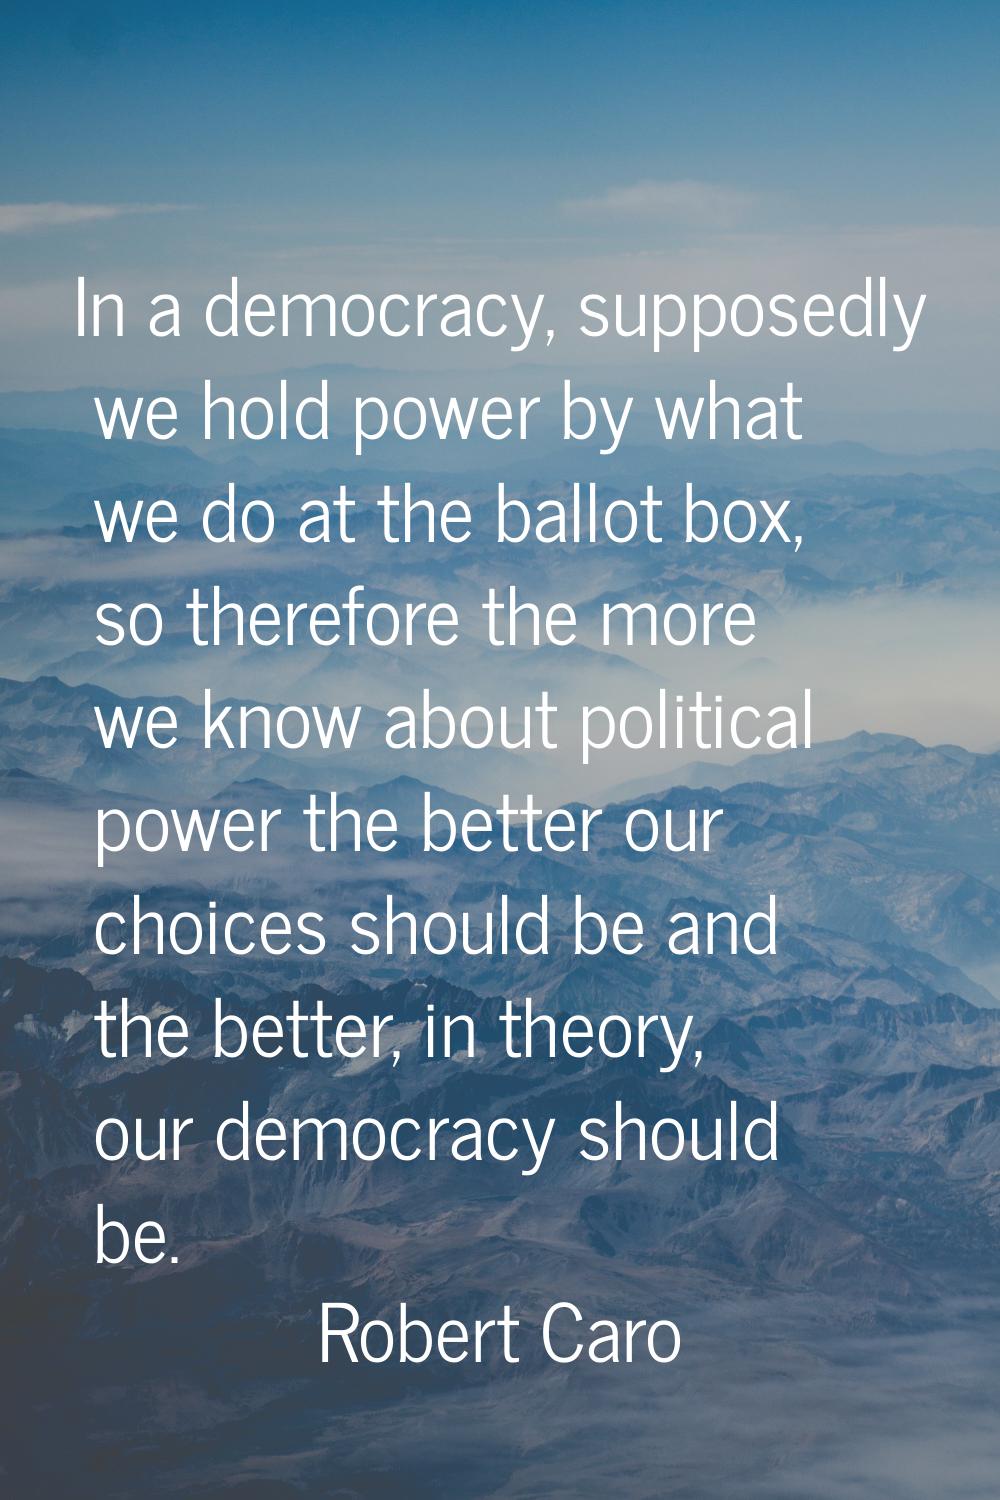 In a democracy, supposedly we hold power by what we do at the ballot box, so therefore the more we 